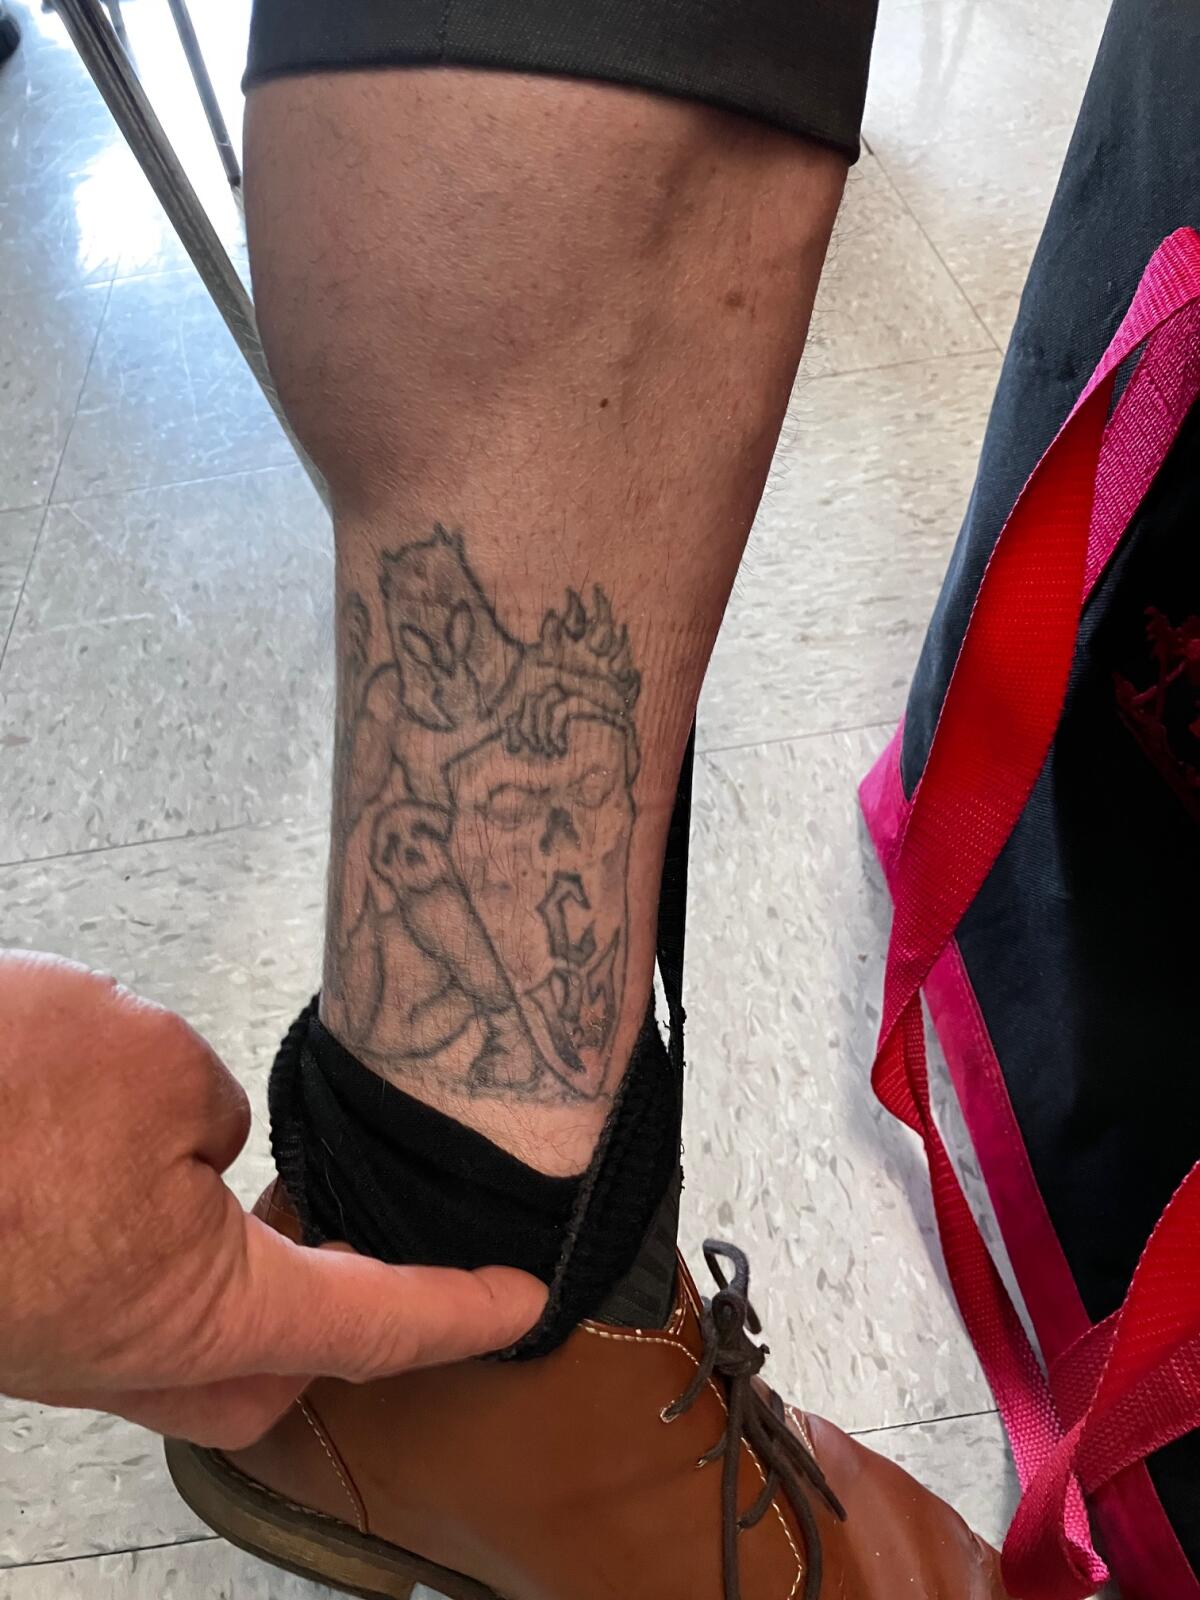 A tattoo on the calf of a Sheriff's Department employee